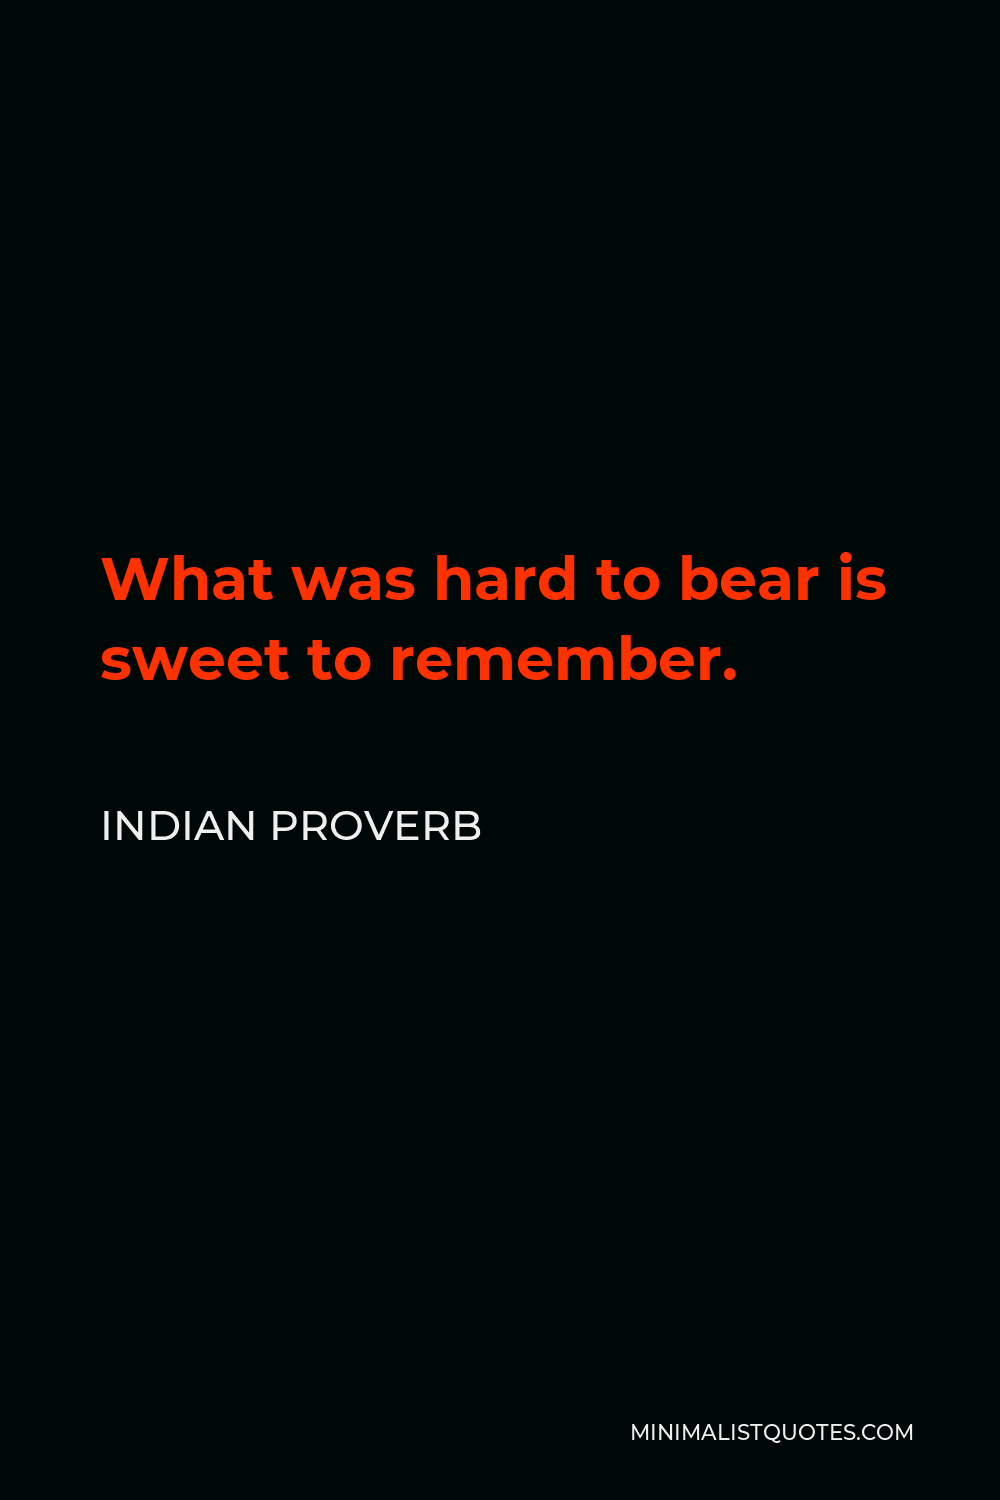 Indian Proverb Quote - What was hard to bear is sweet to remember.